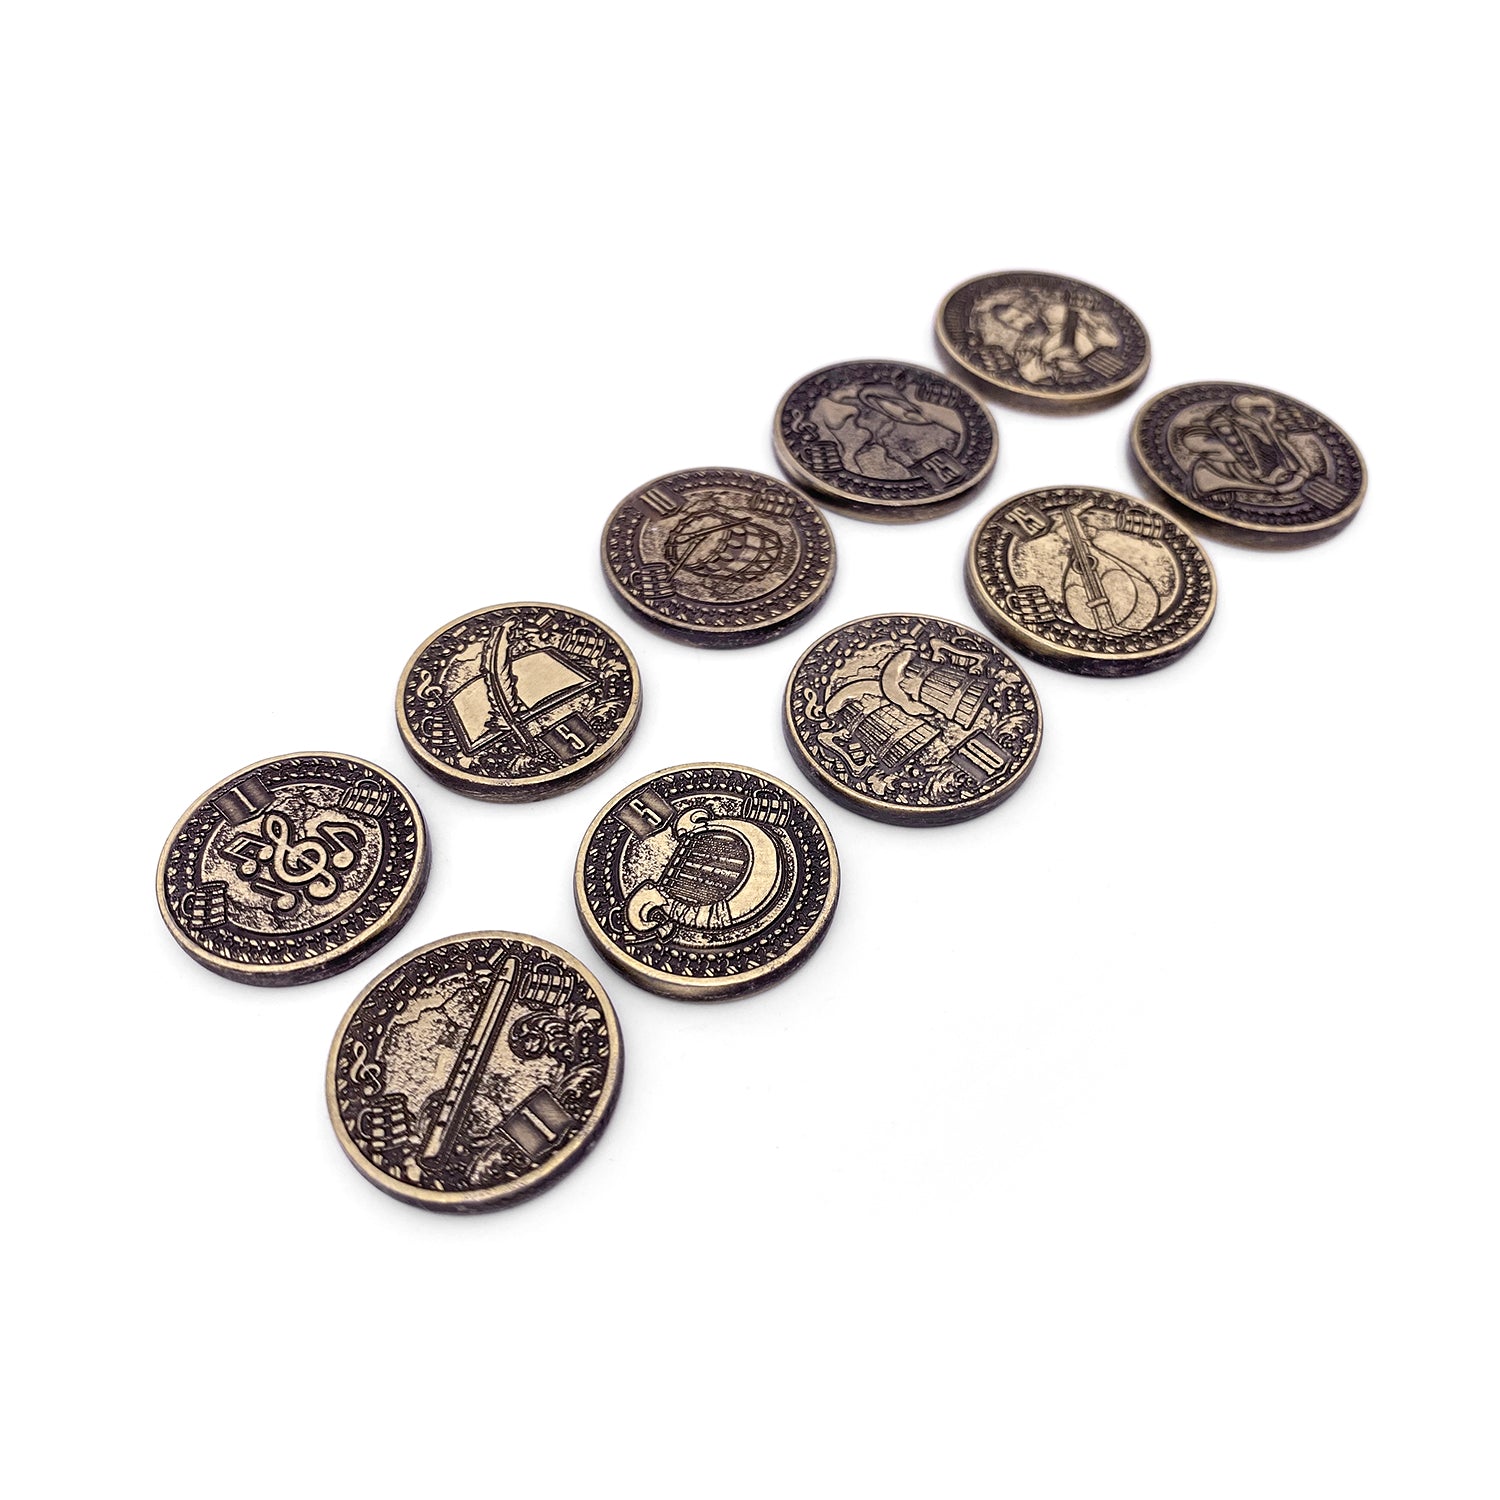 Adventure Coins - Bard Metal Coins Set of 10